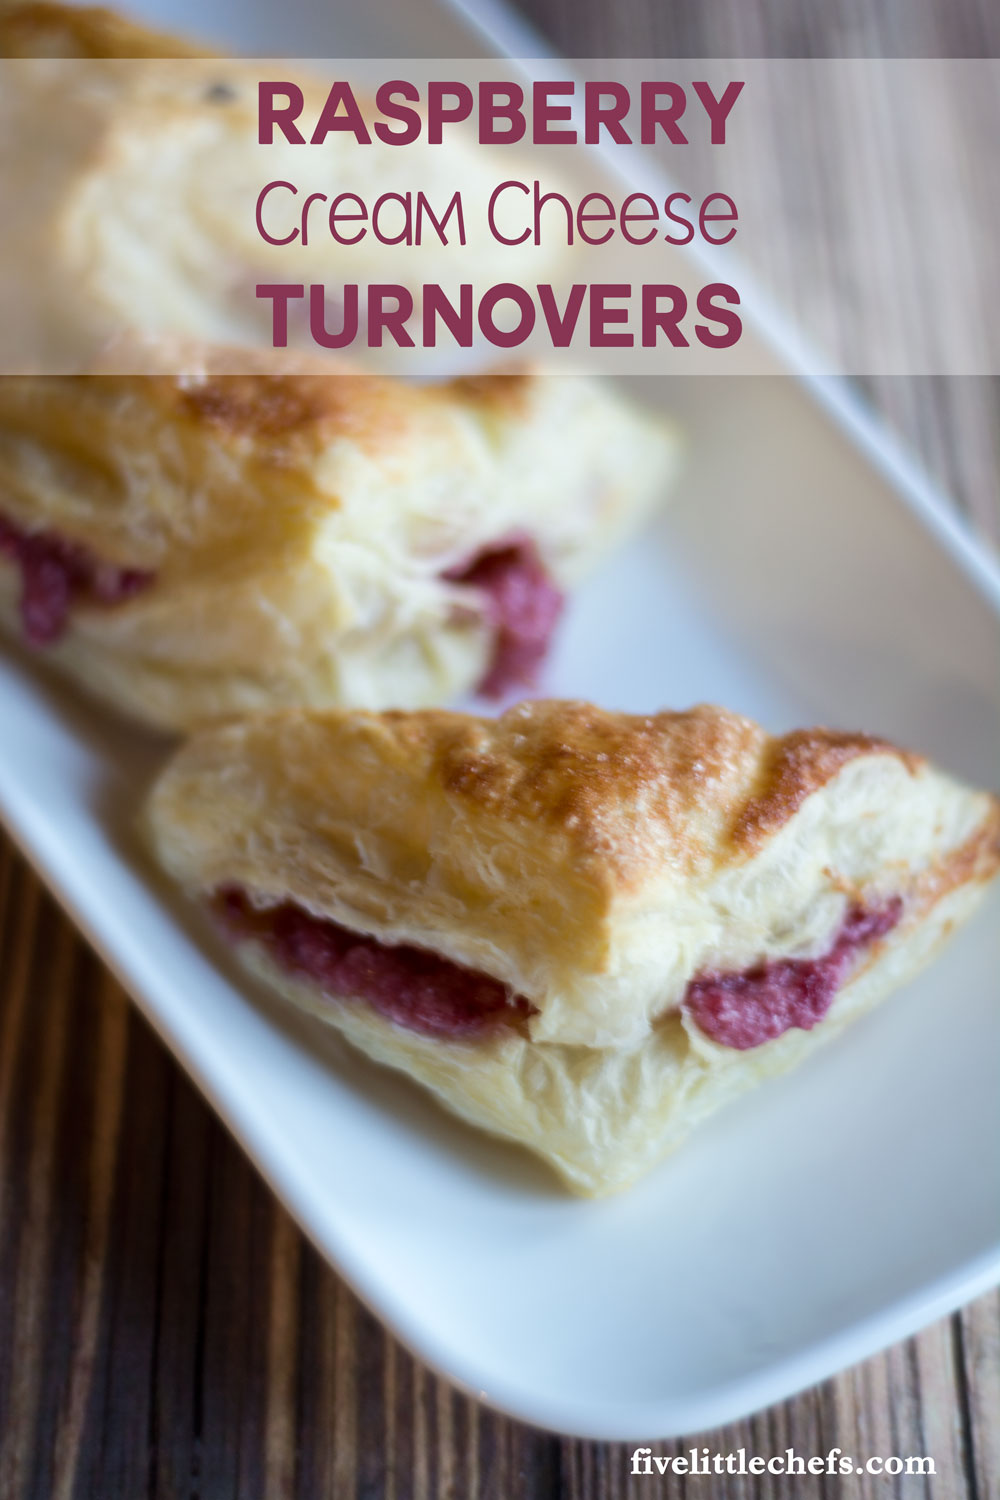 Raspberry Cream Cheese Turnovers are SO easy to make. Just a few ingredients and about 40 minutes. This danish recipe is sure to impress your guests.